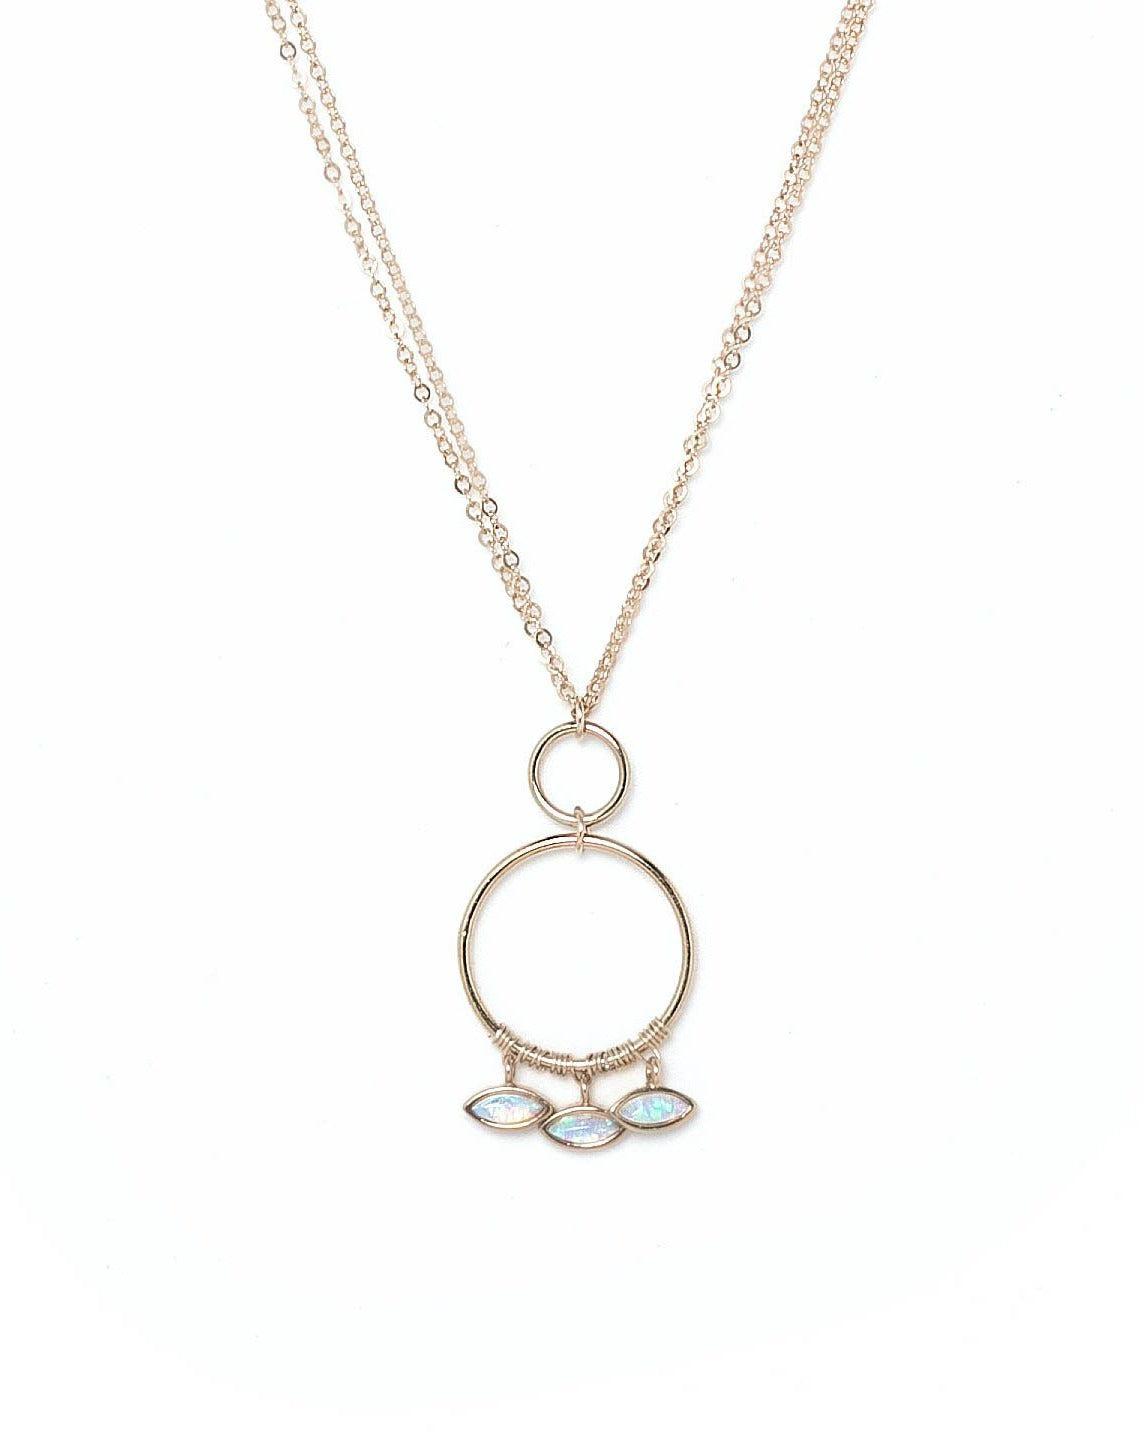 Aven Necklace by KOZAKH. An 18 to 20 inch adjustable length necklace in 14K Gold Filled, featuring Marquise Opal charms.